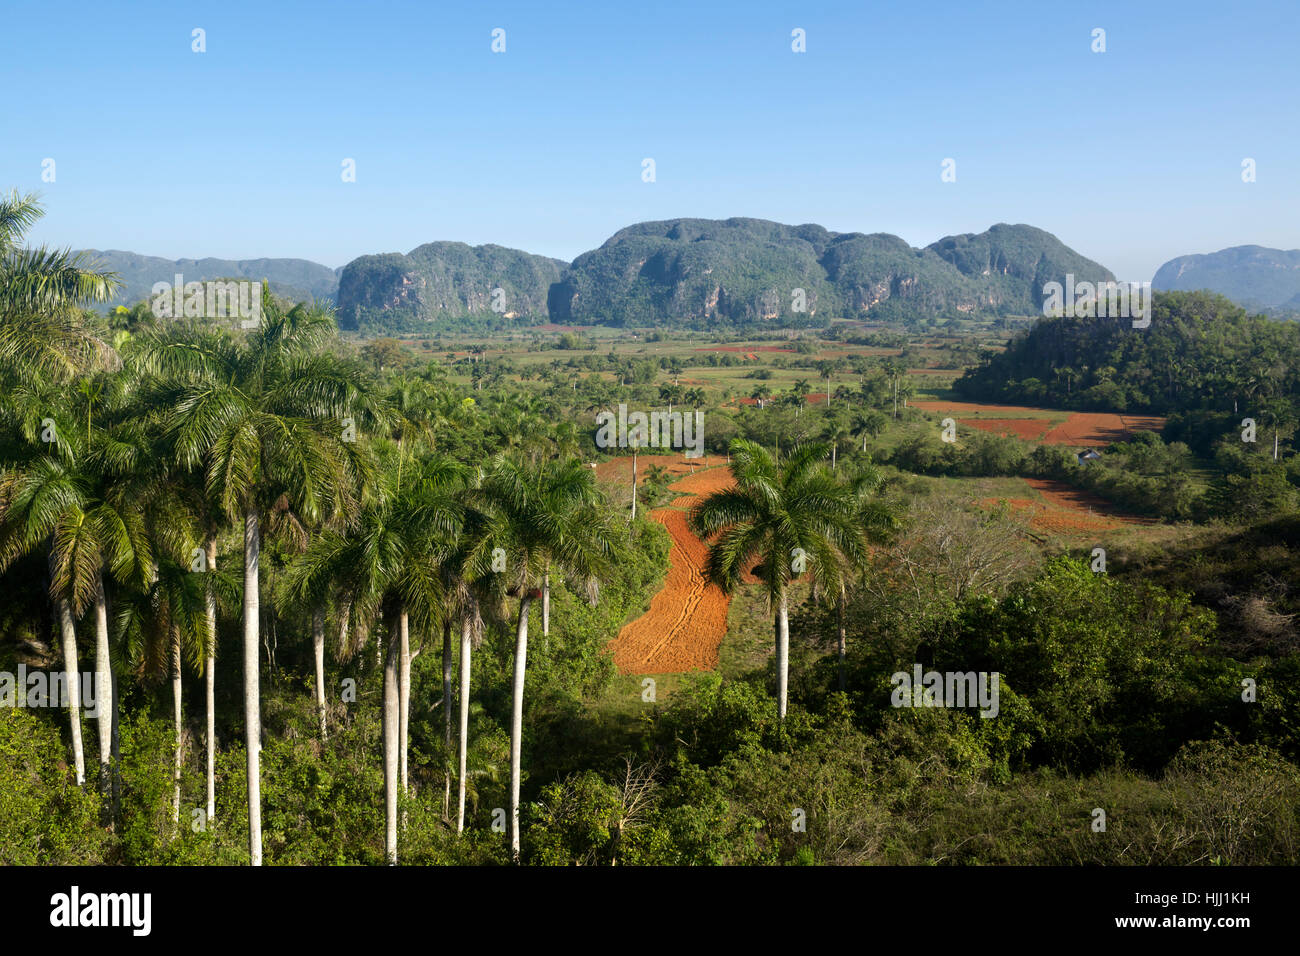 Vellykket Rummet partikel travel, mountains, cuba, country, landscape, scenery, countryside, nature  Stock Photo - Alamy